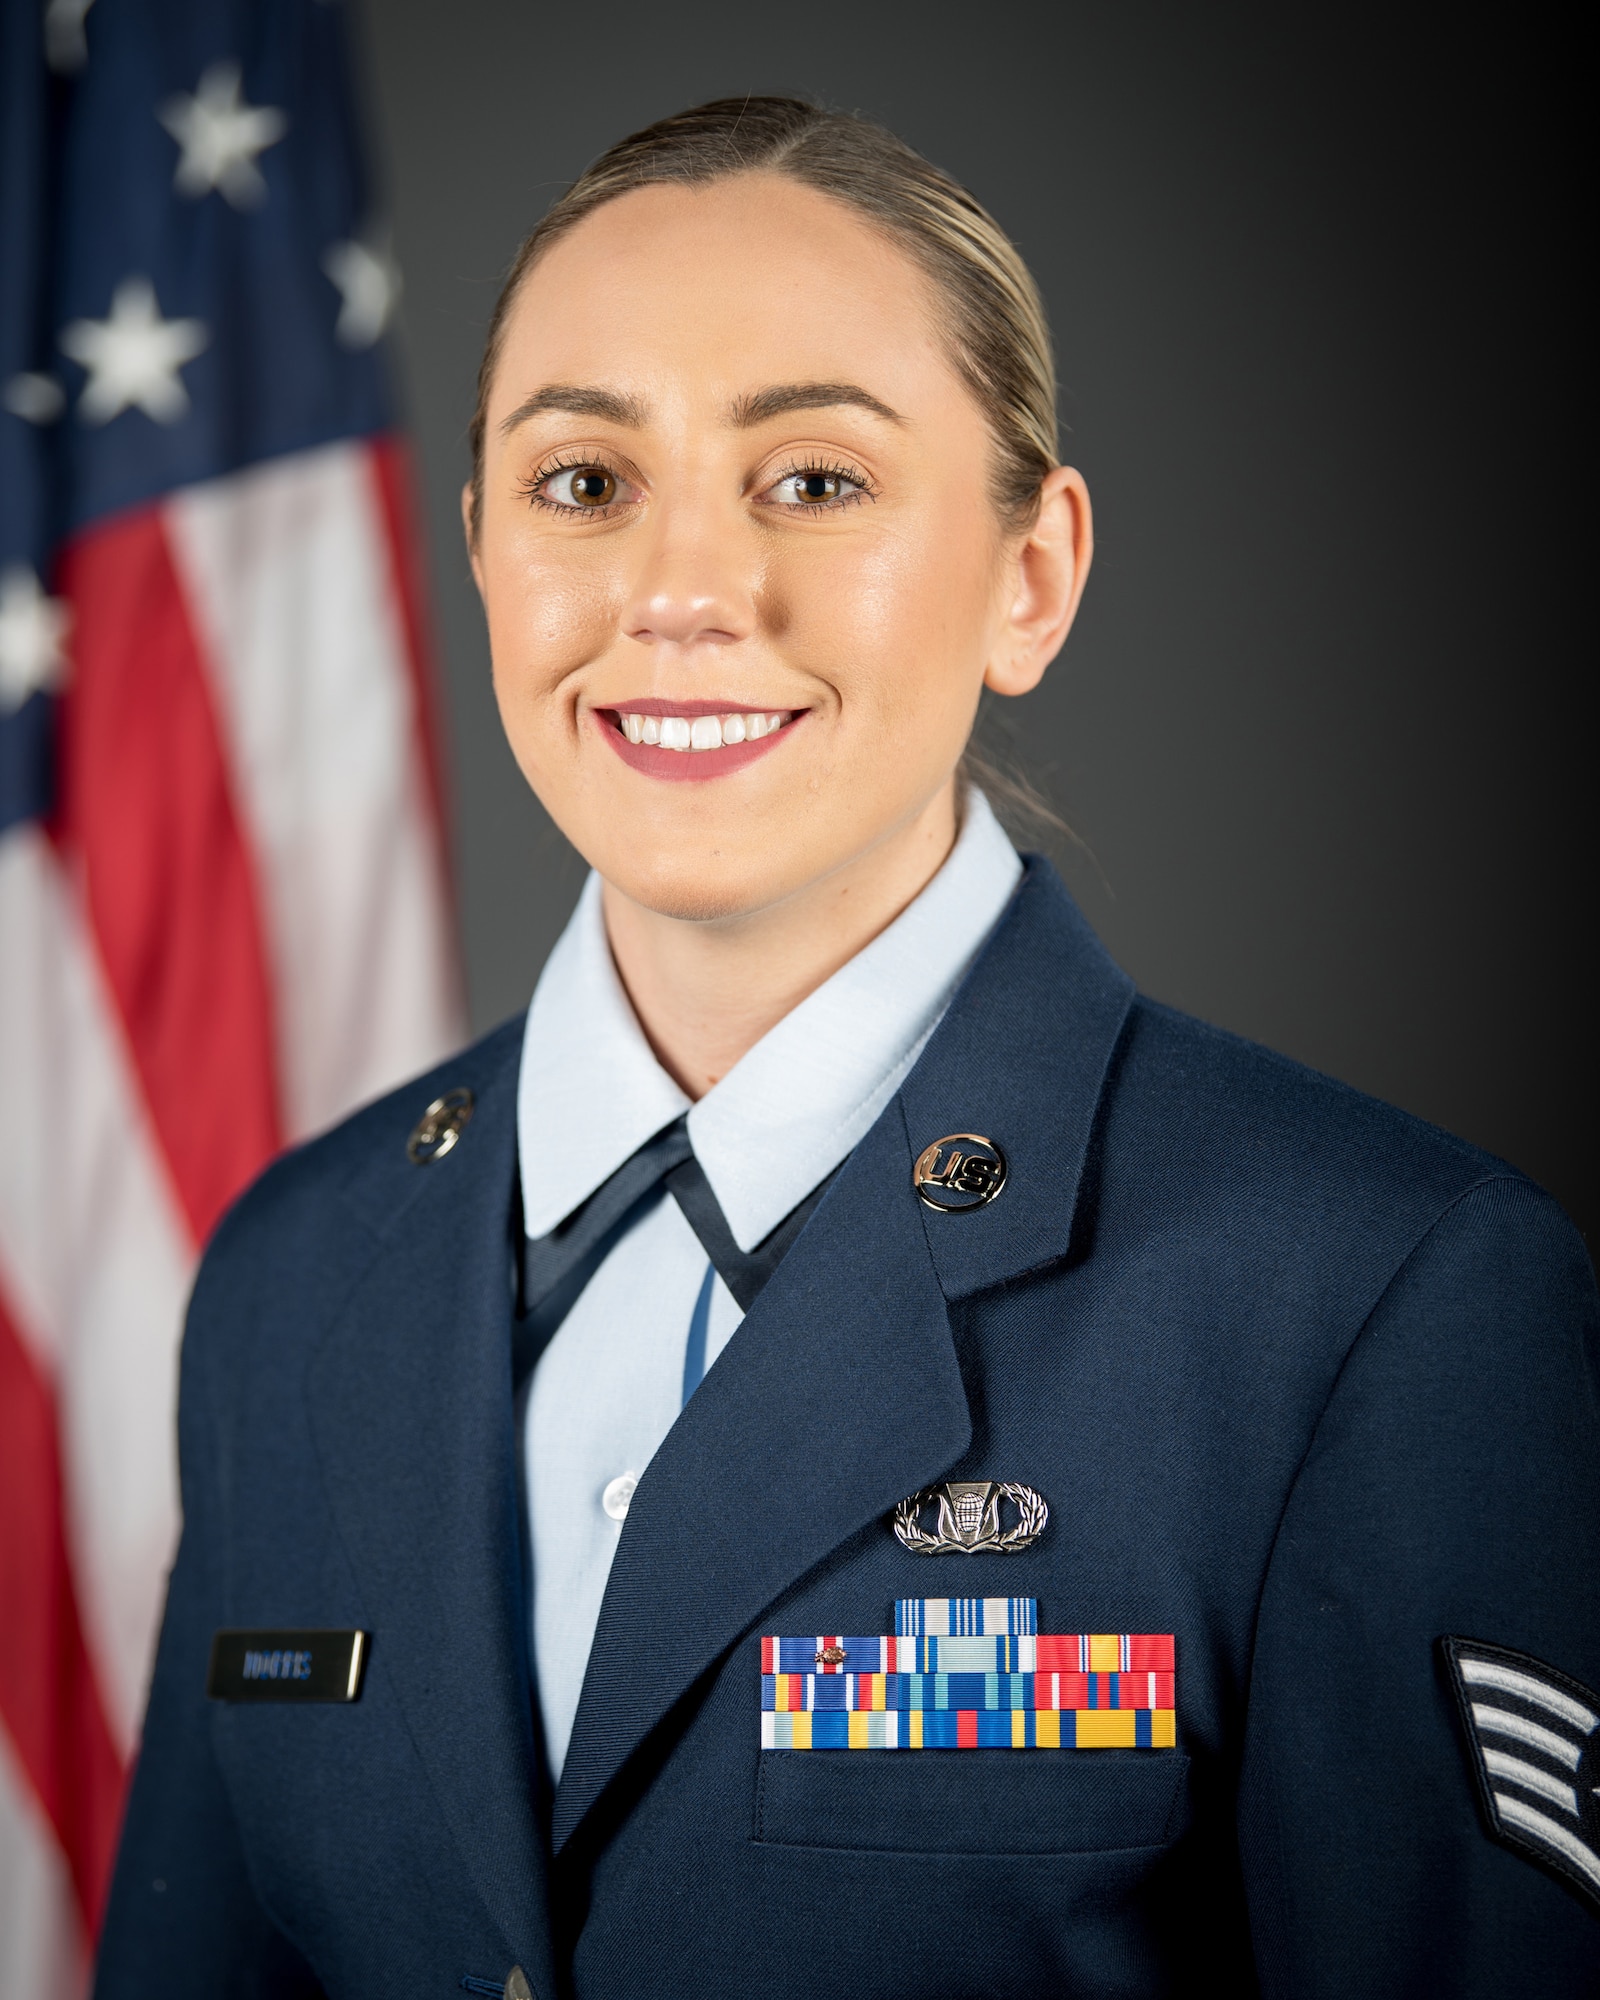 Staff Sgt. Marissa Morris has been named the 2020 Kentucky Air National Guard Airman of the Year in the Non-Commissioned Officer category. (U.S. Air National Guard photo by Staff Sgt. Joshua Horton)